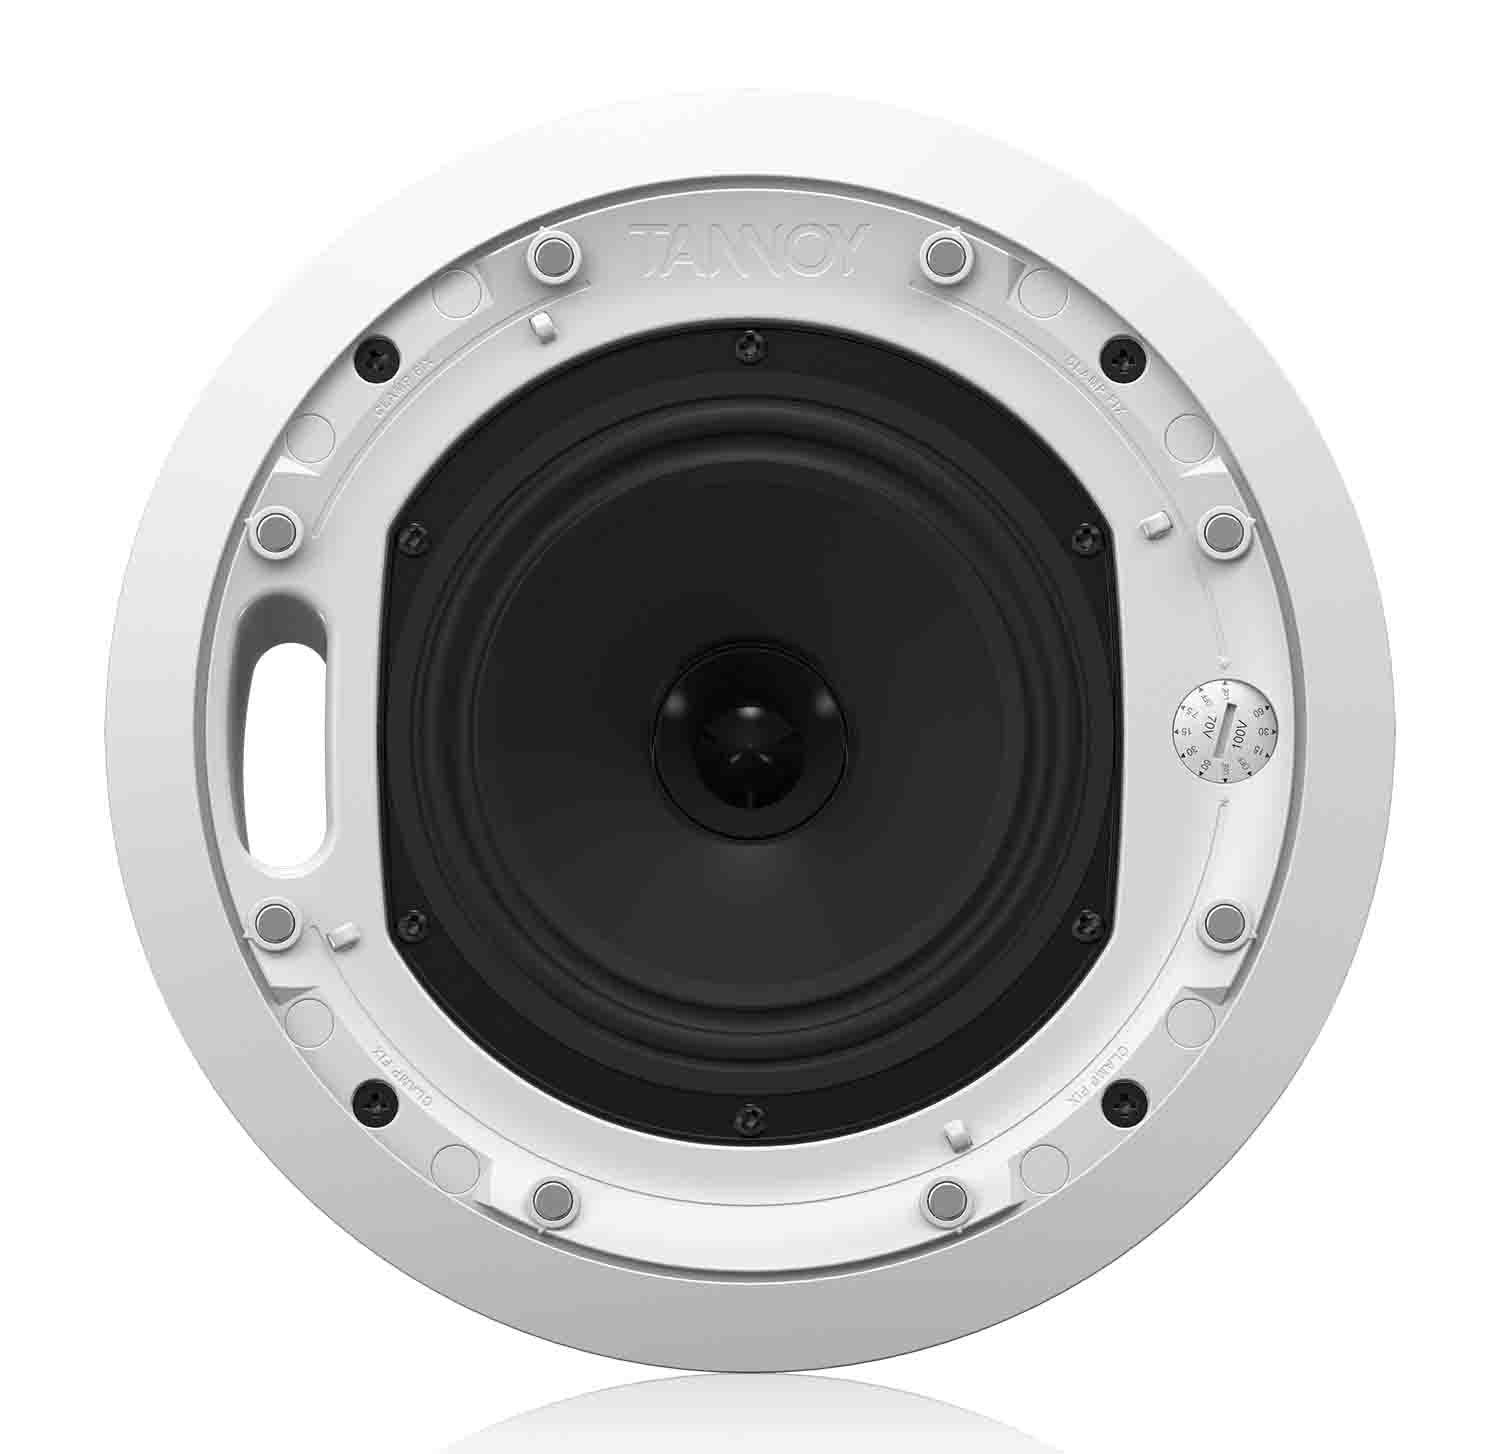 Tannoy CMS 603DC PI, 6-Inch Full Range Ceiling Loudspeaker with Dual Concentric Driver - Pre-Install - Hollywood DJ